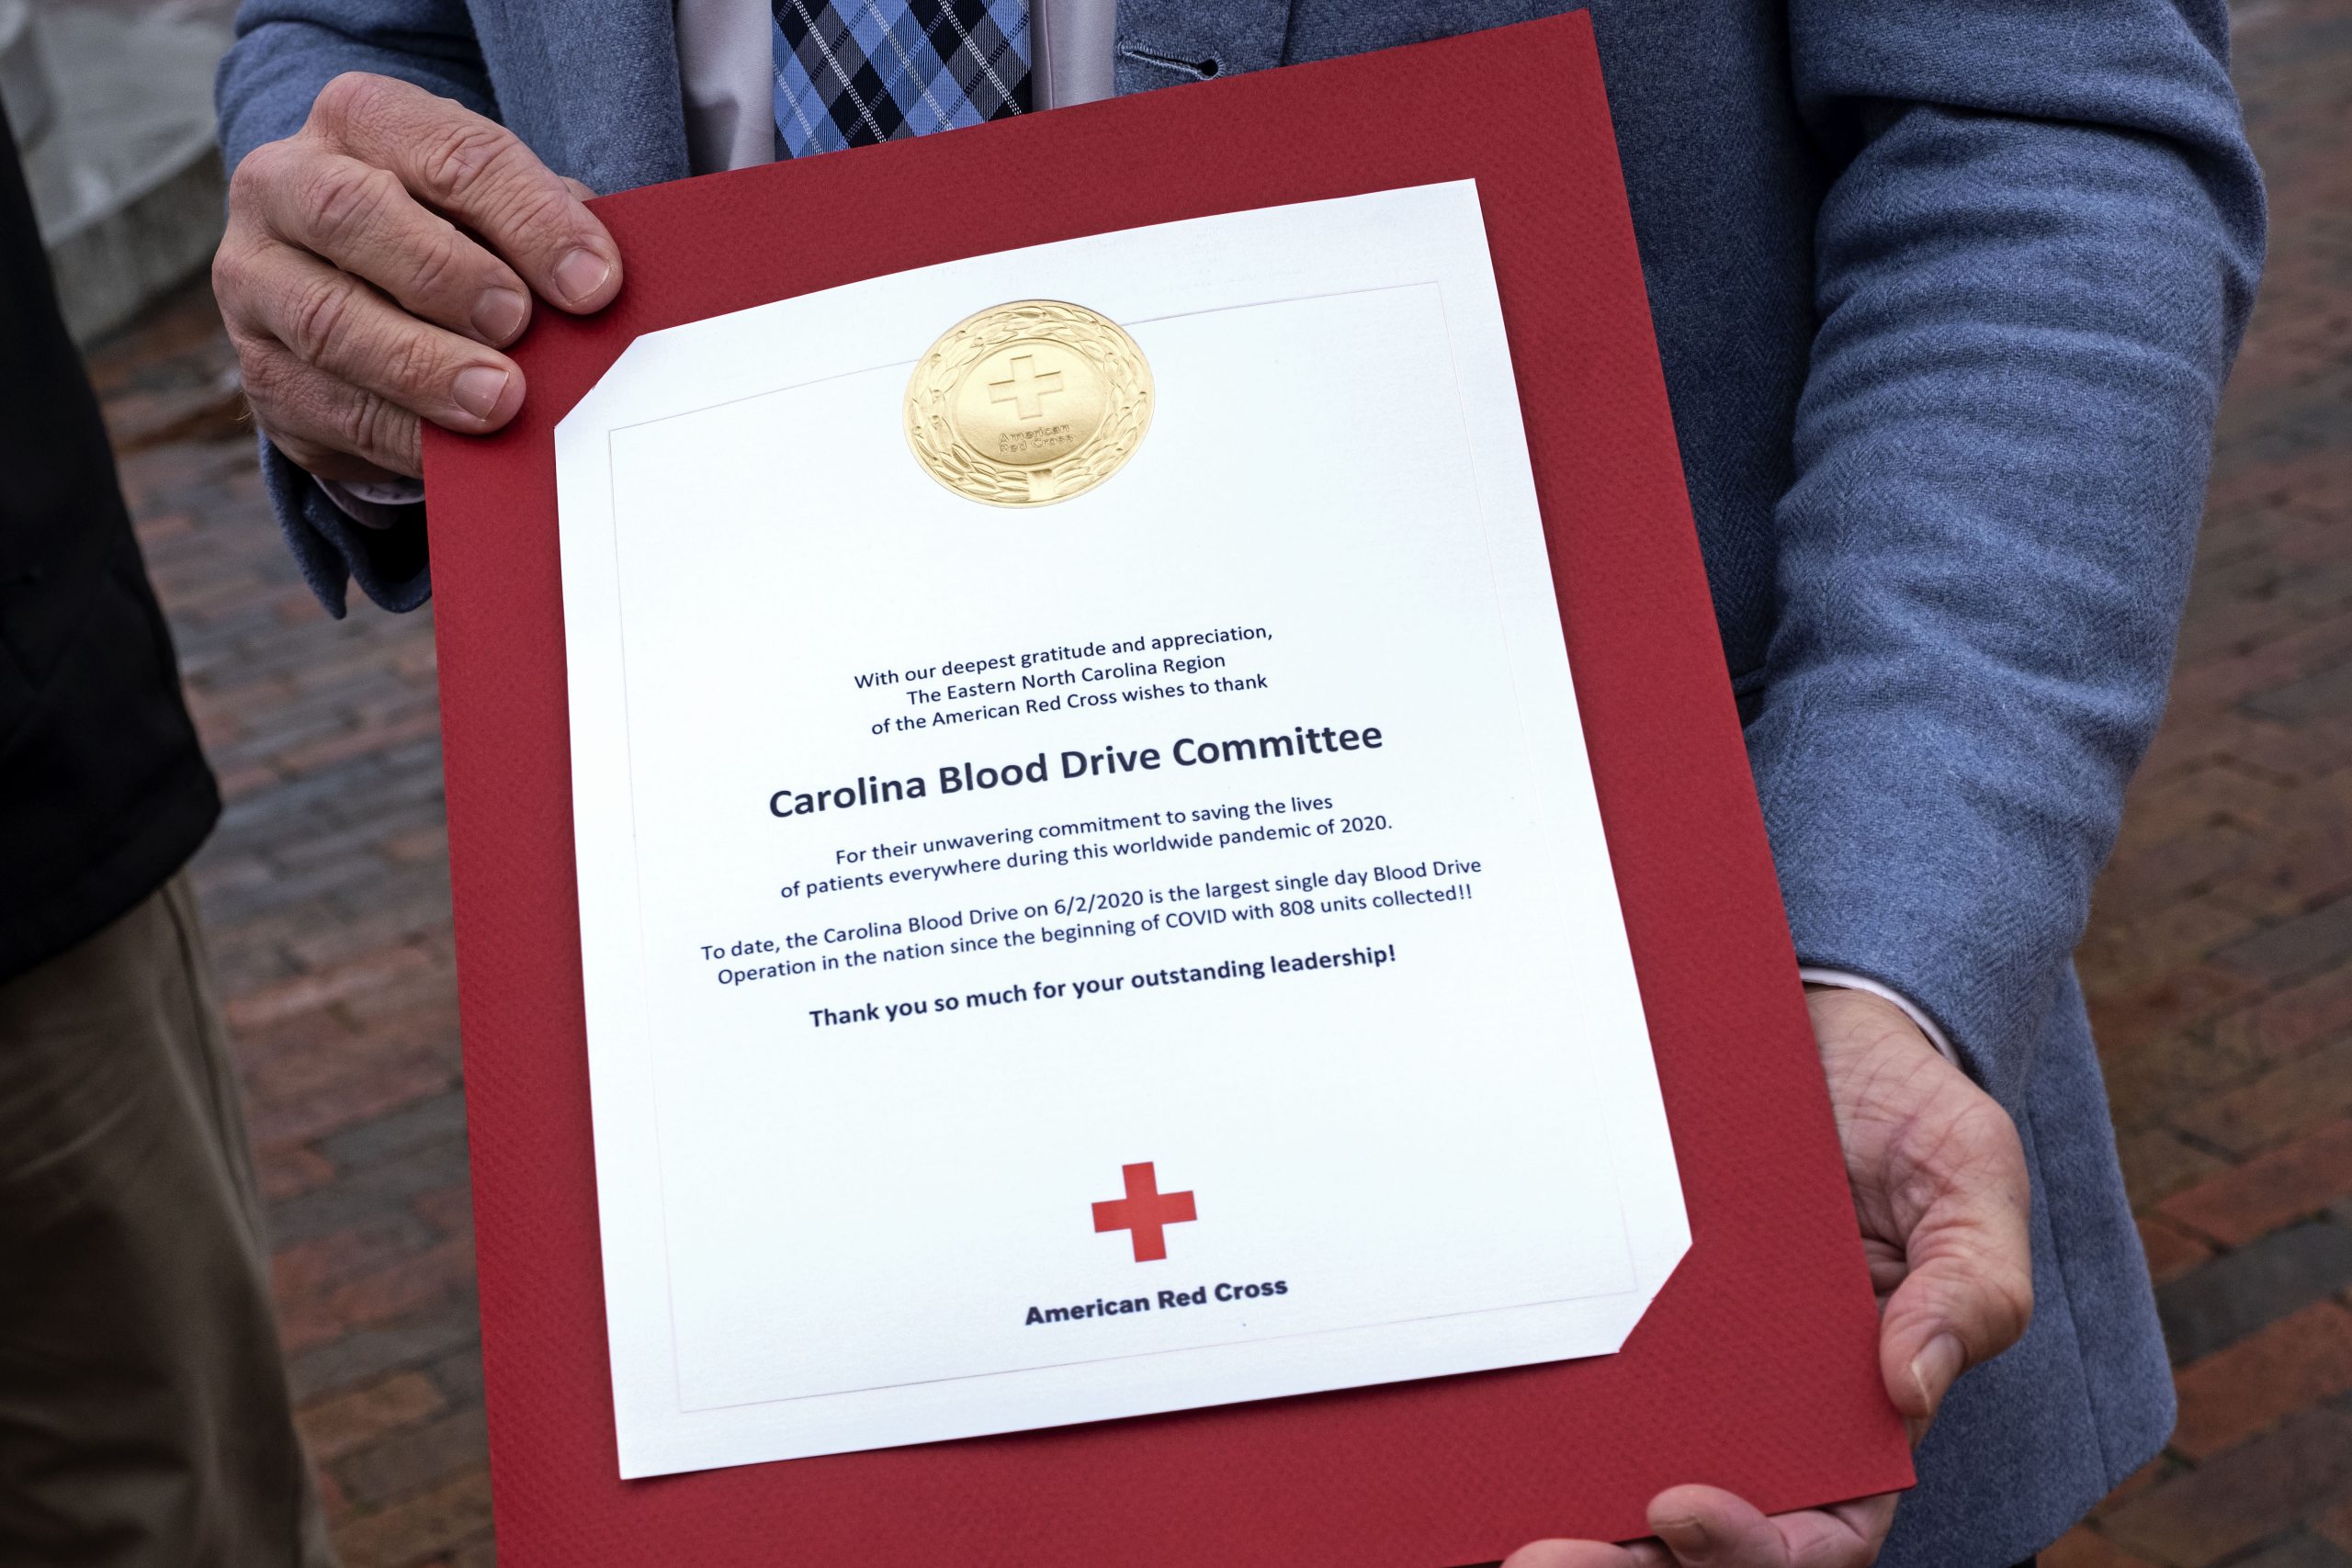 close-up of the award certificate from the American Red Cross